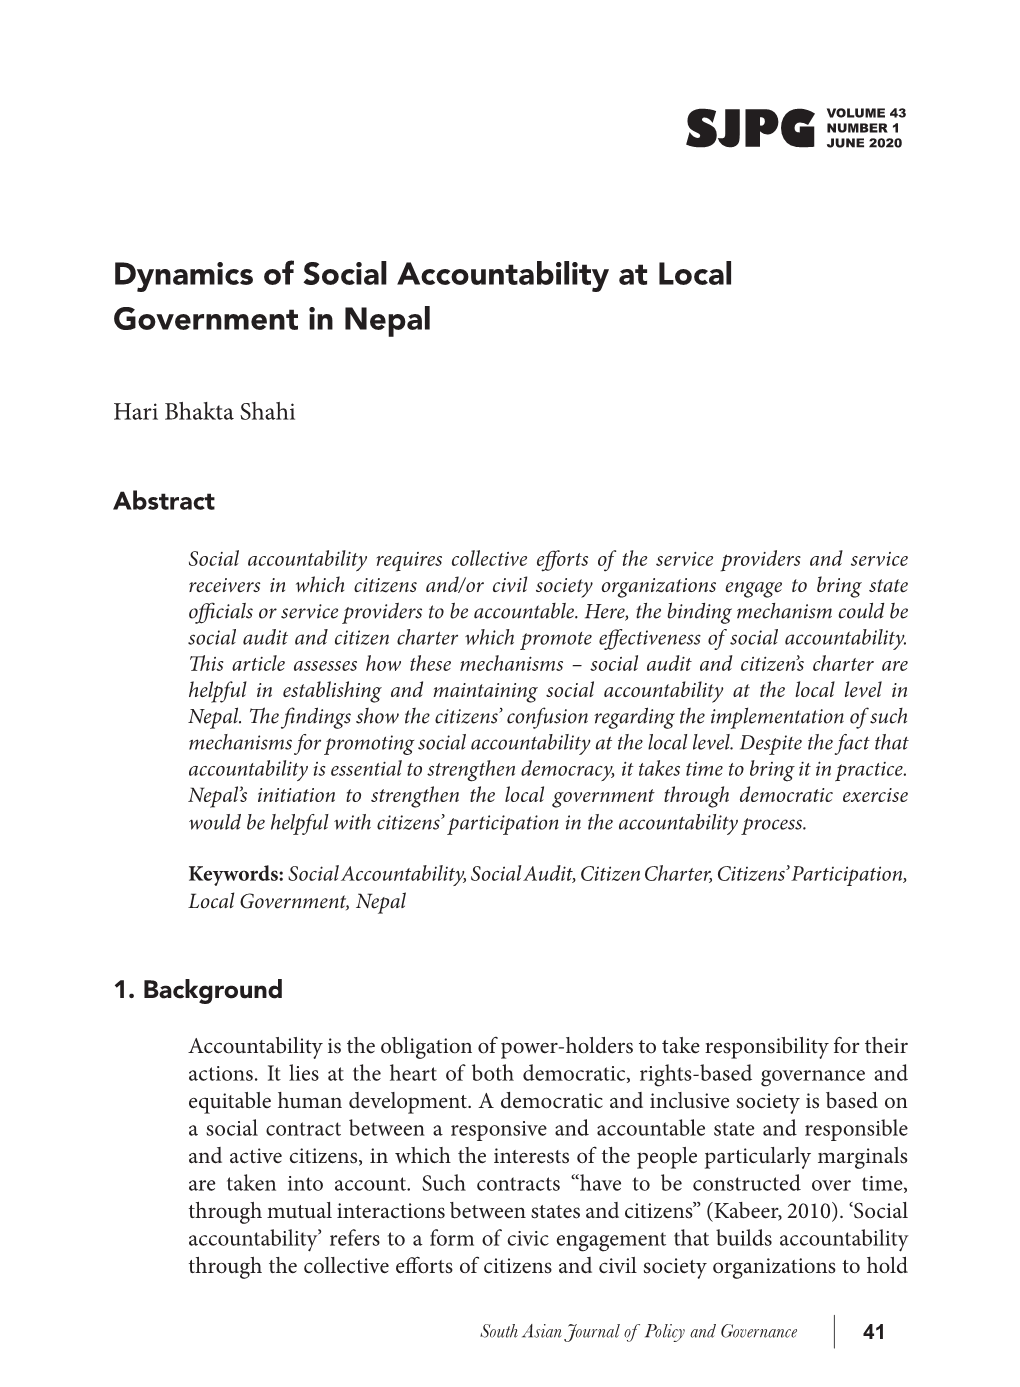 Dynamics of Social Accountability at Local Government in Nepal